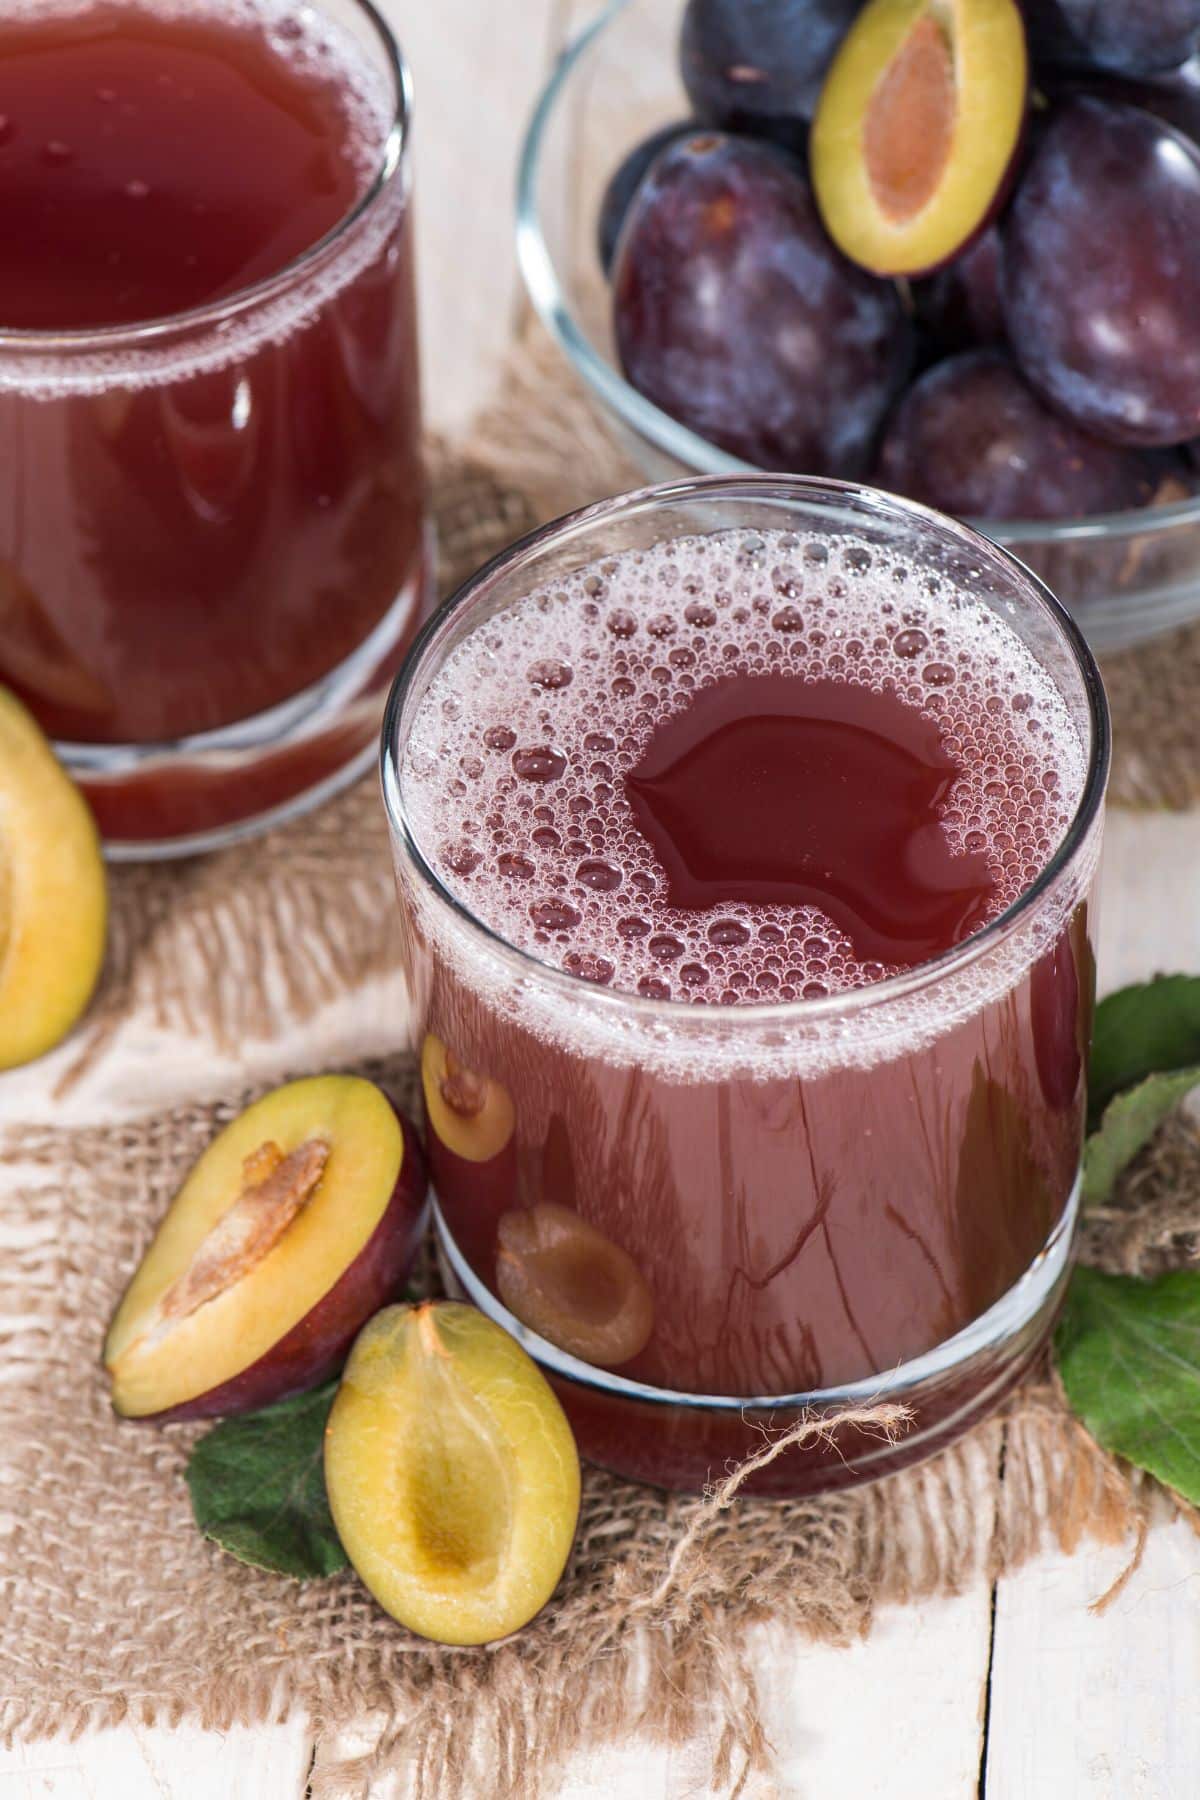 Two glasses of plum juice on a table with fresh plums.